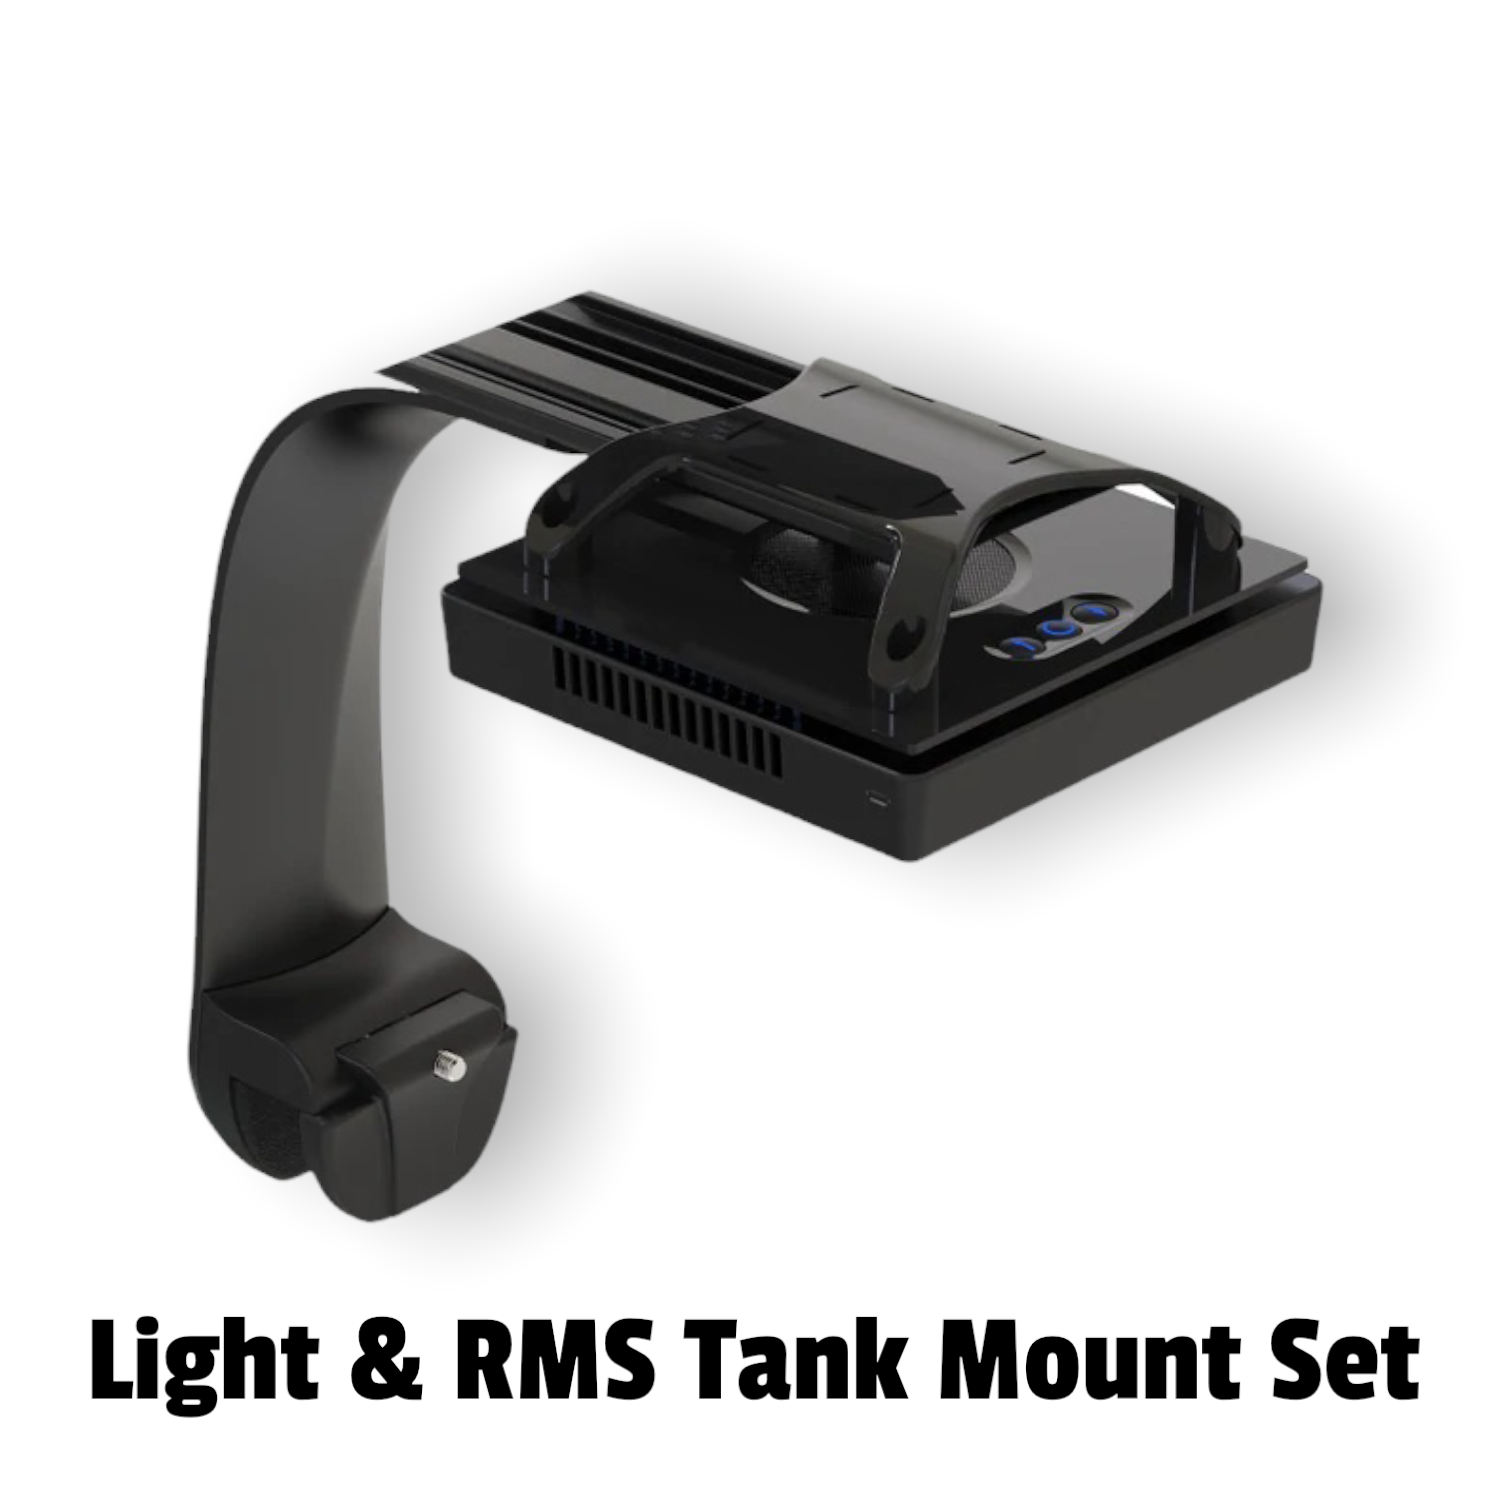 Ecotech Radion G6 XR15 Pro And RMS Tank Mount System